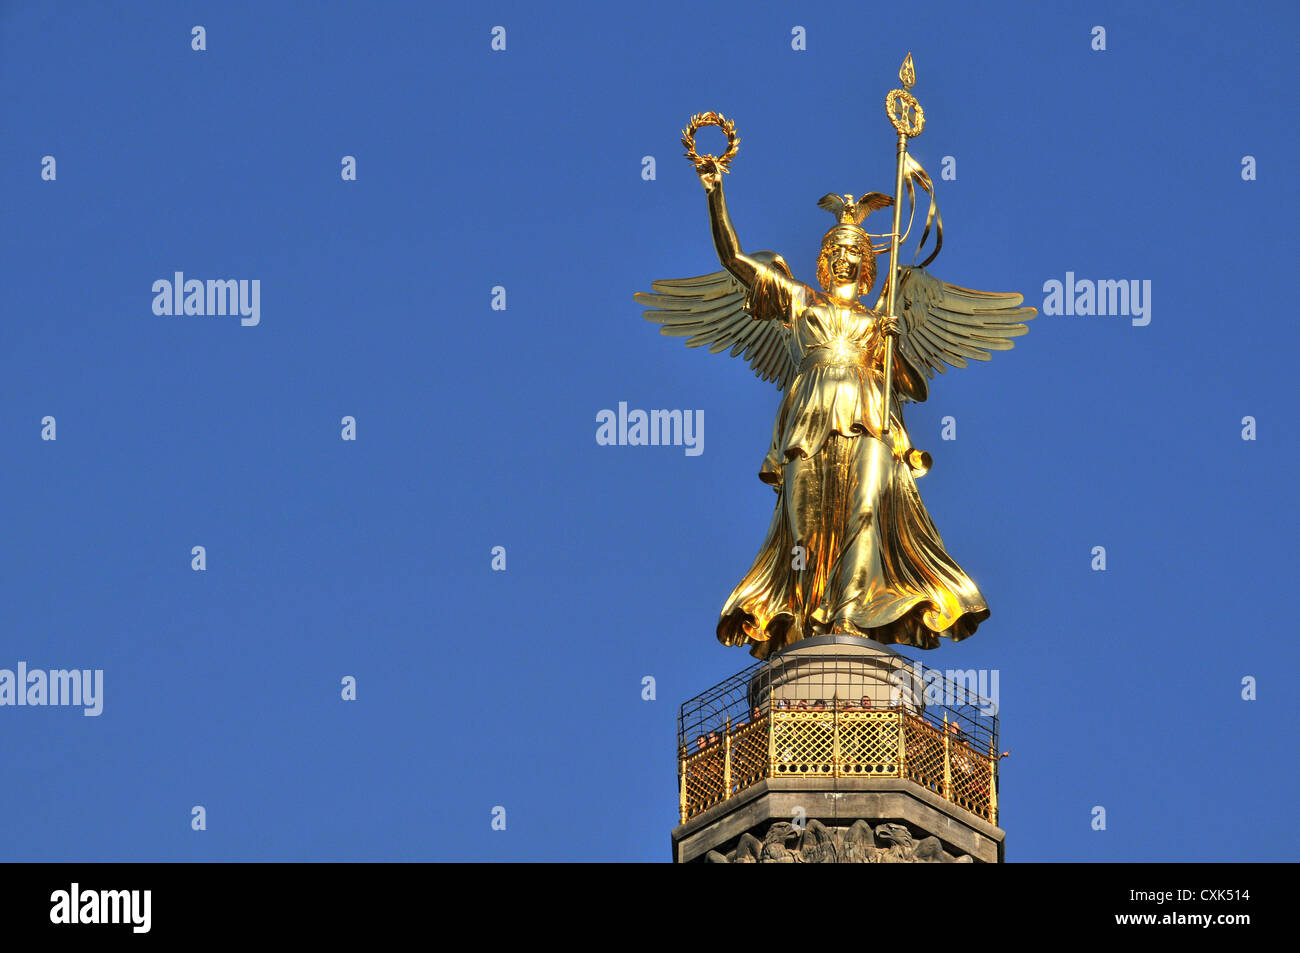 golden statue at the top of Siegessaule victory column Grossen stern Berlin Germany Stock Photo